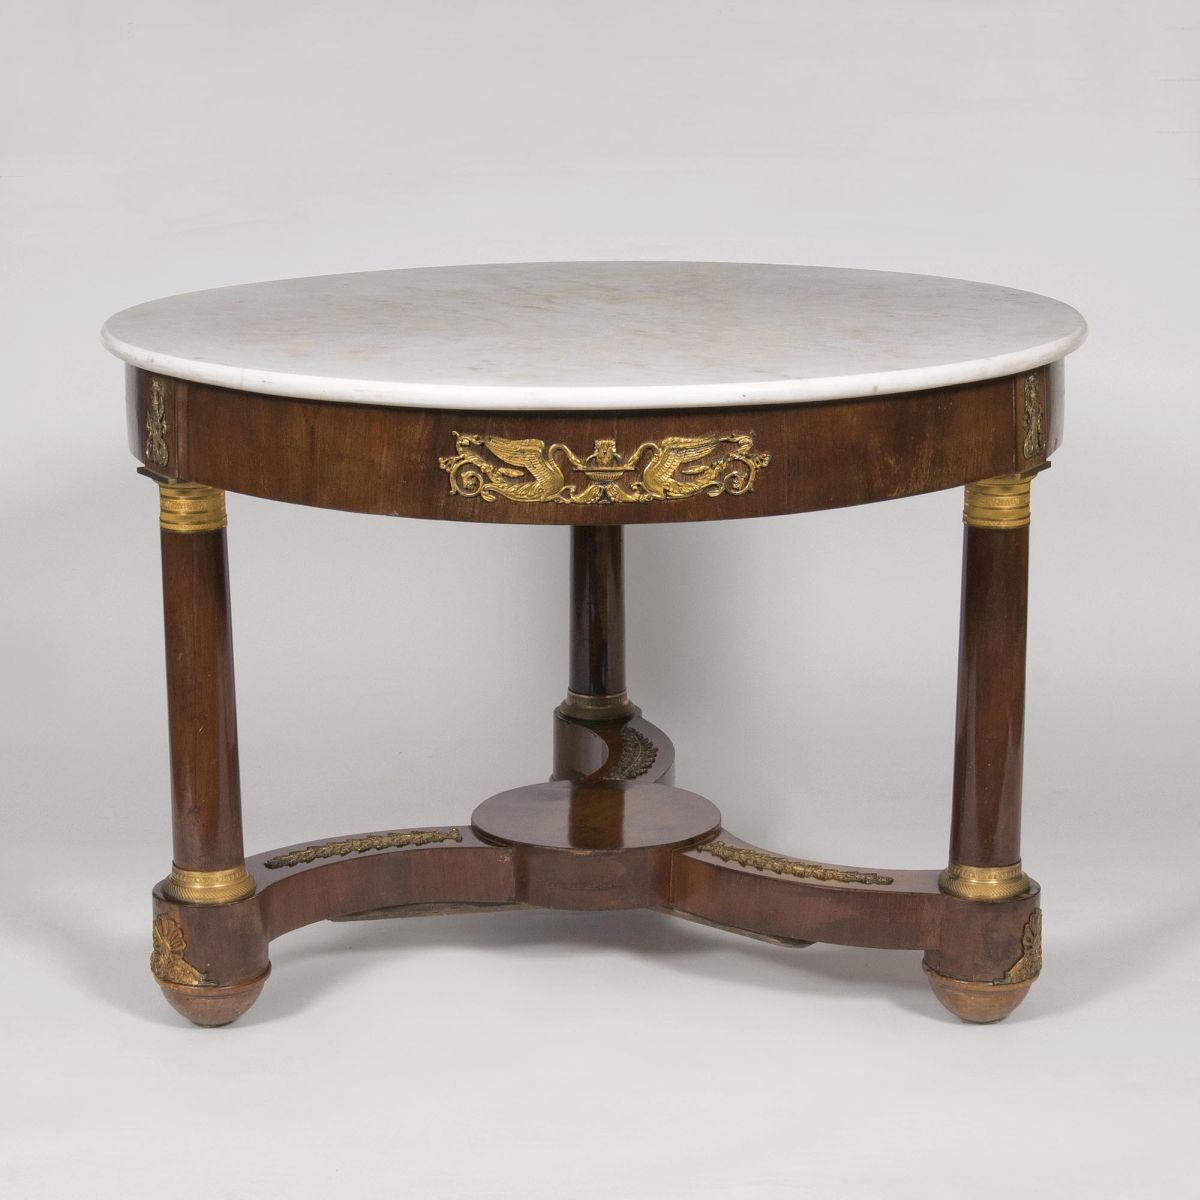 A Round Empire Table